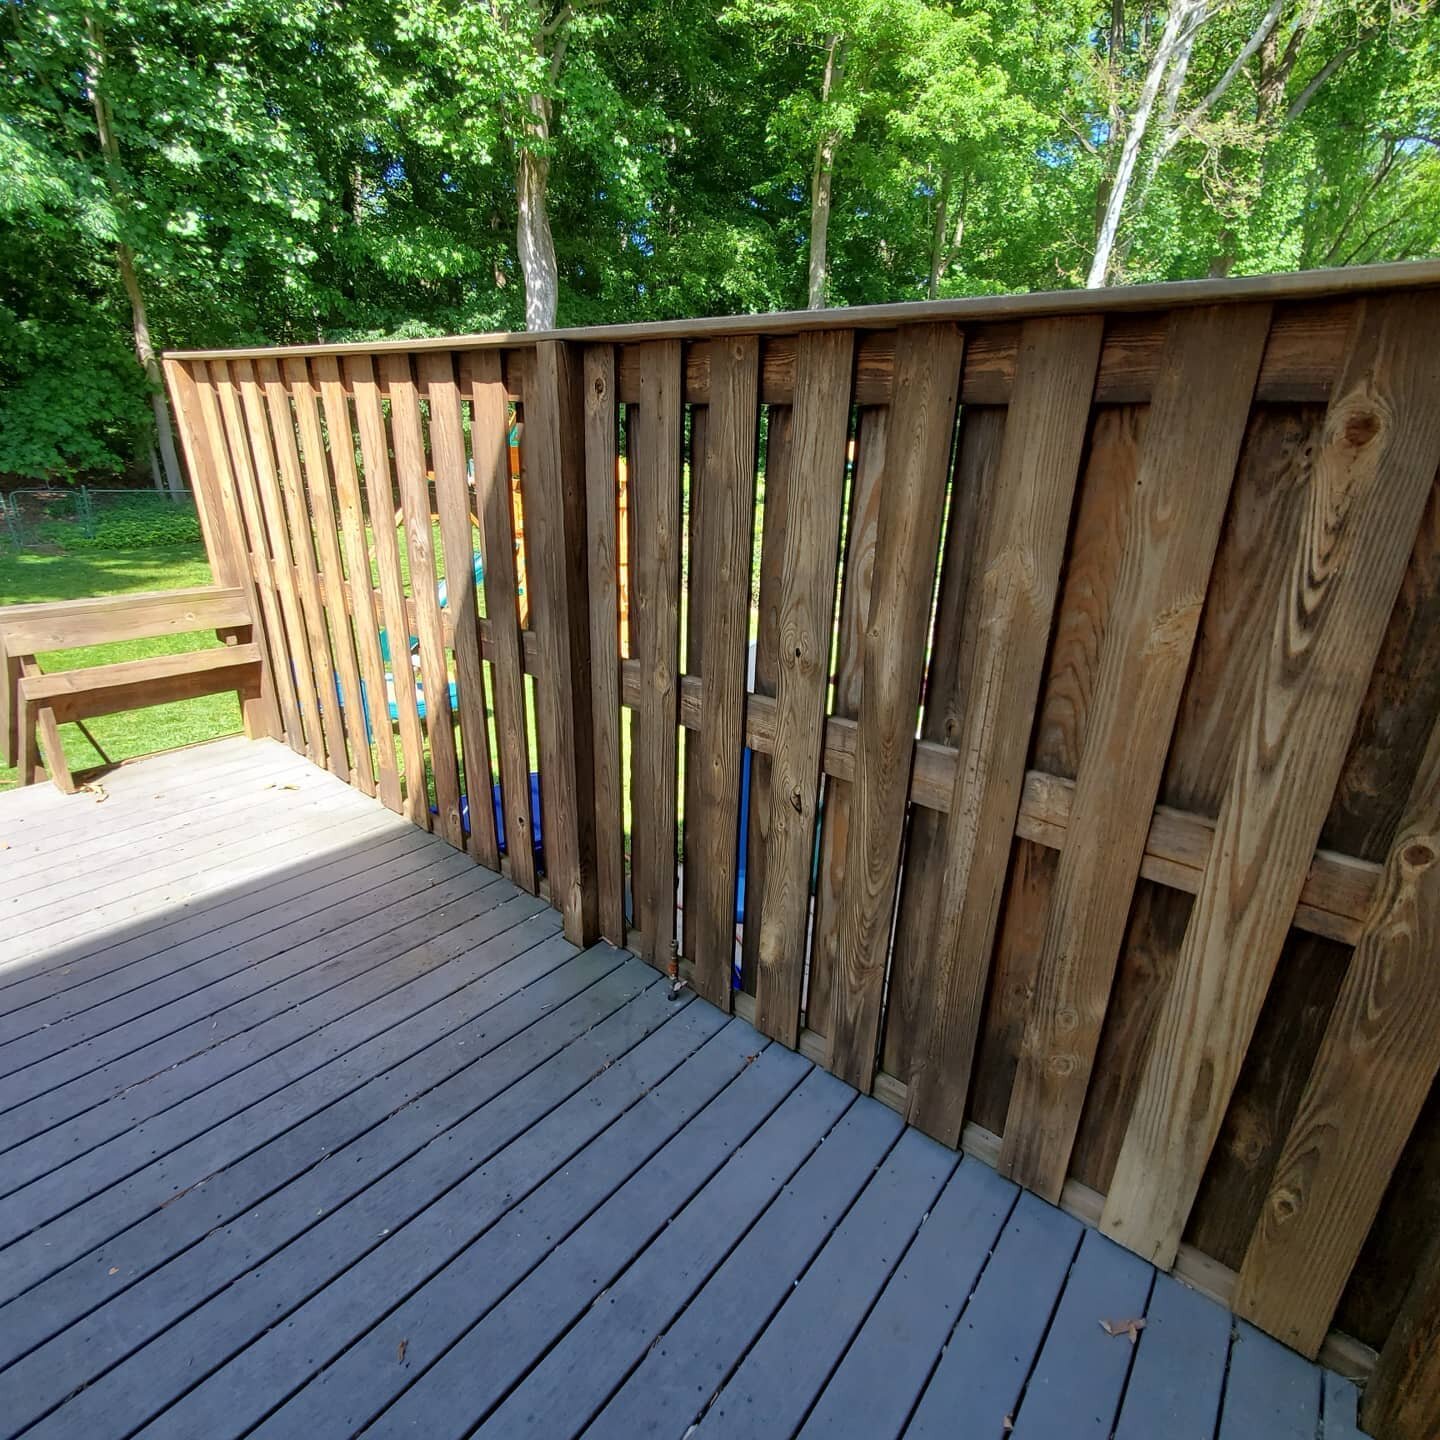 The Deck Dudes cleaning and staining.
Get your deck refinished this summer call for free estimate 301.608.9494
#powerwashing #stainingwood